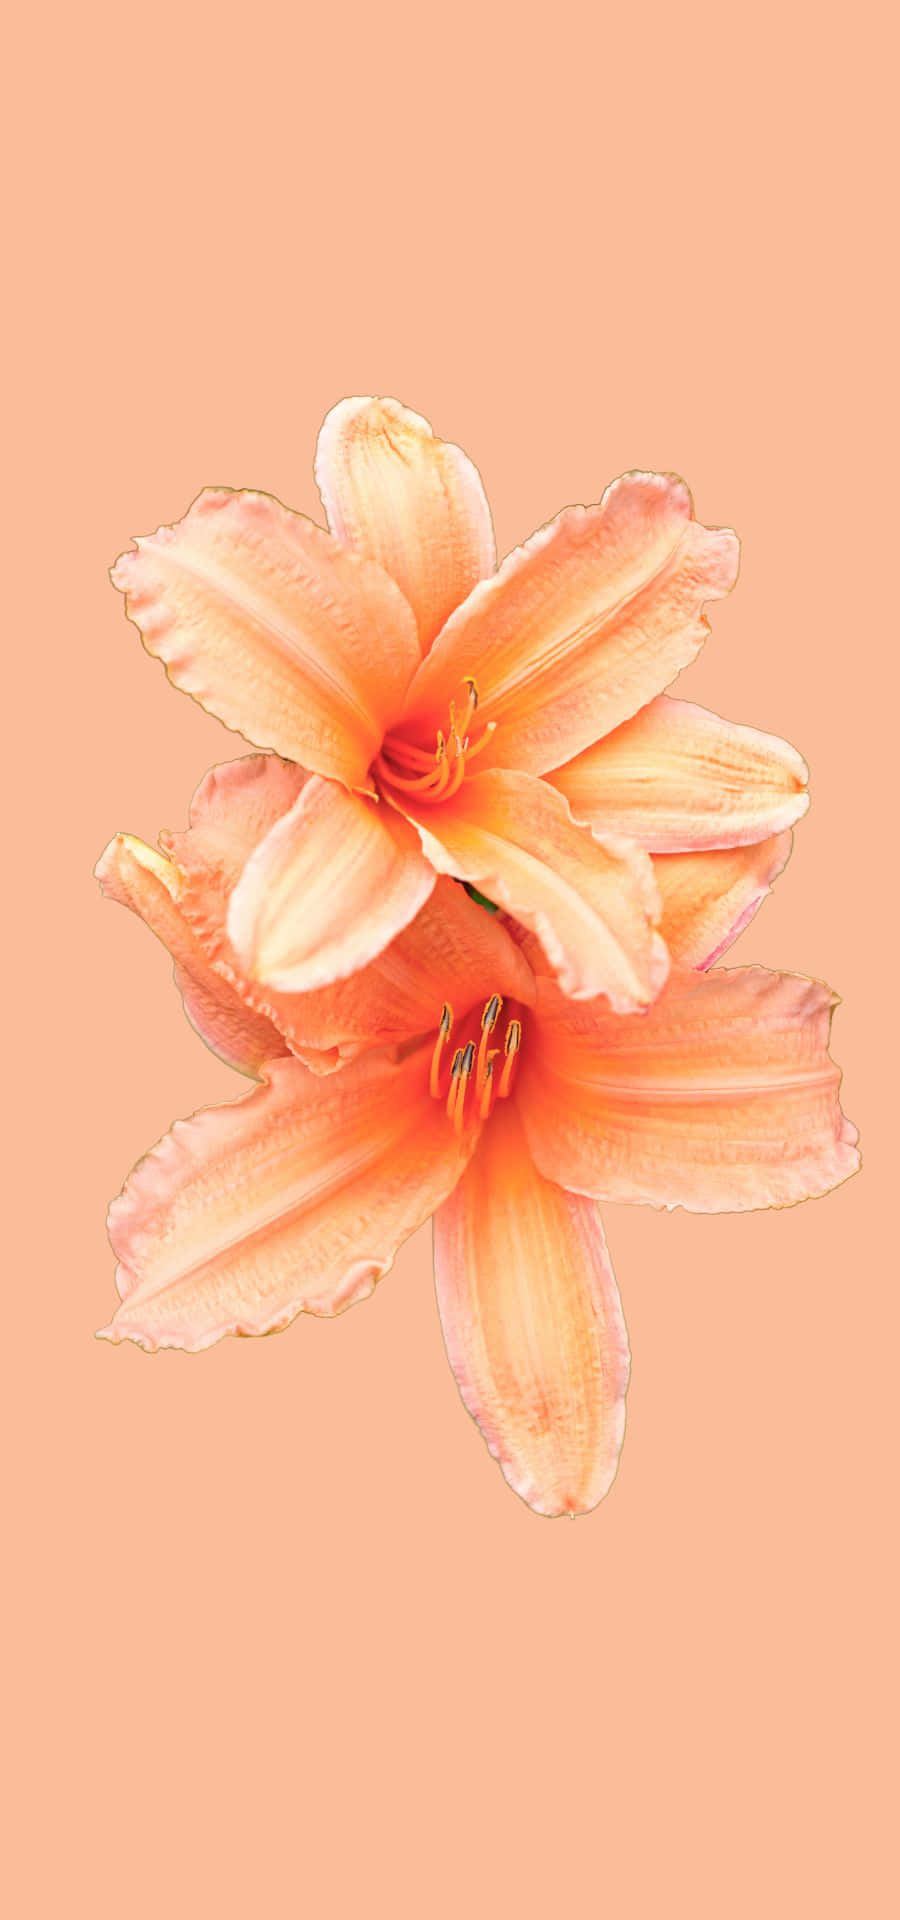 A Picture Of Two Orange Flowers On A Peach Background